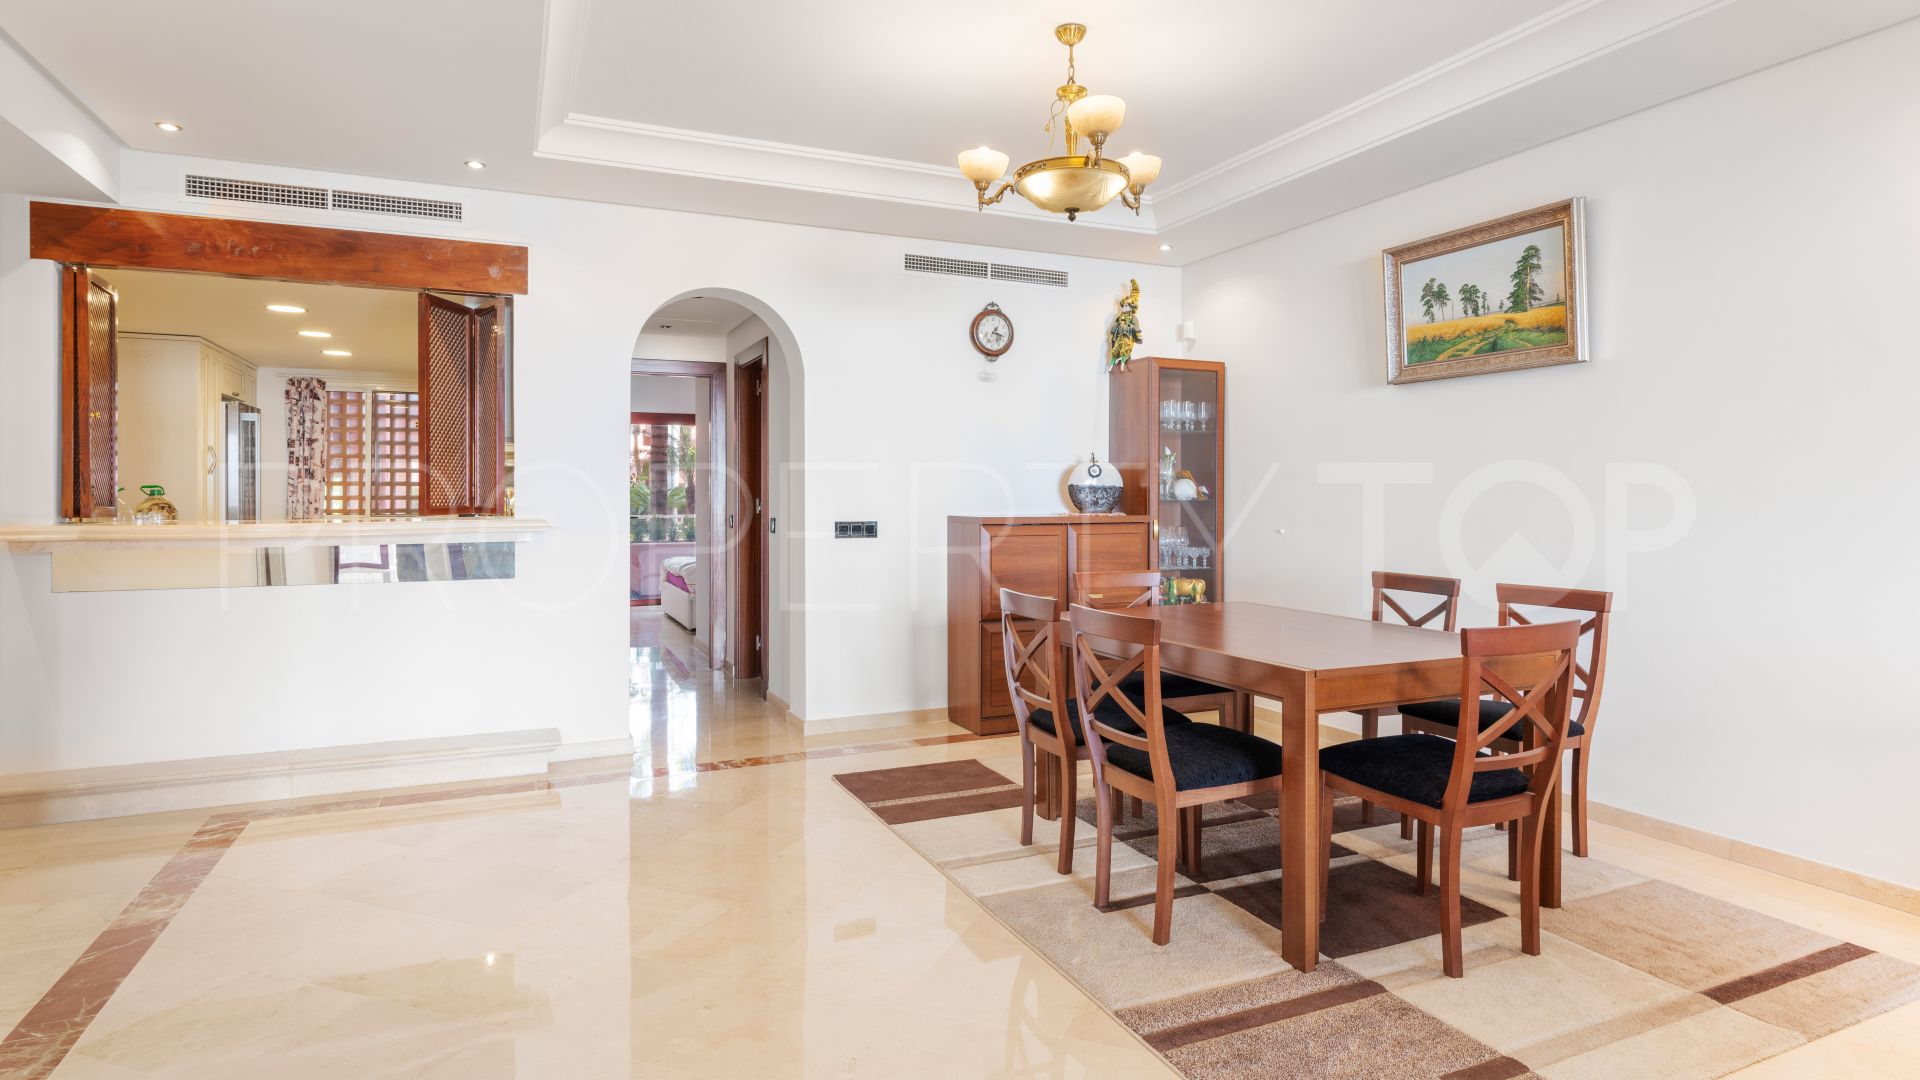 Ground floor apartment in Cabo Bermejo for sale